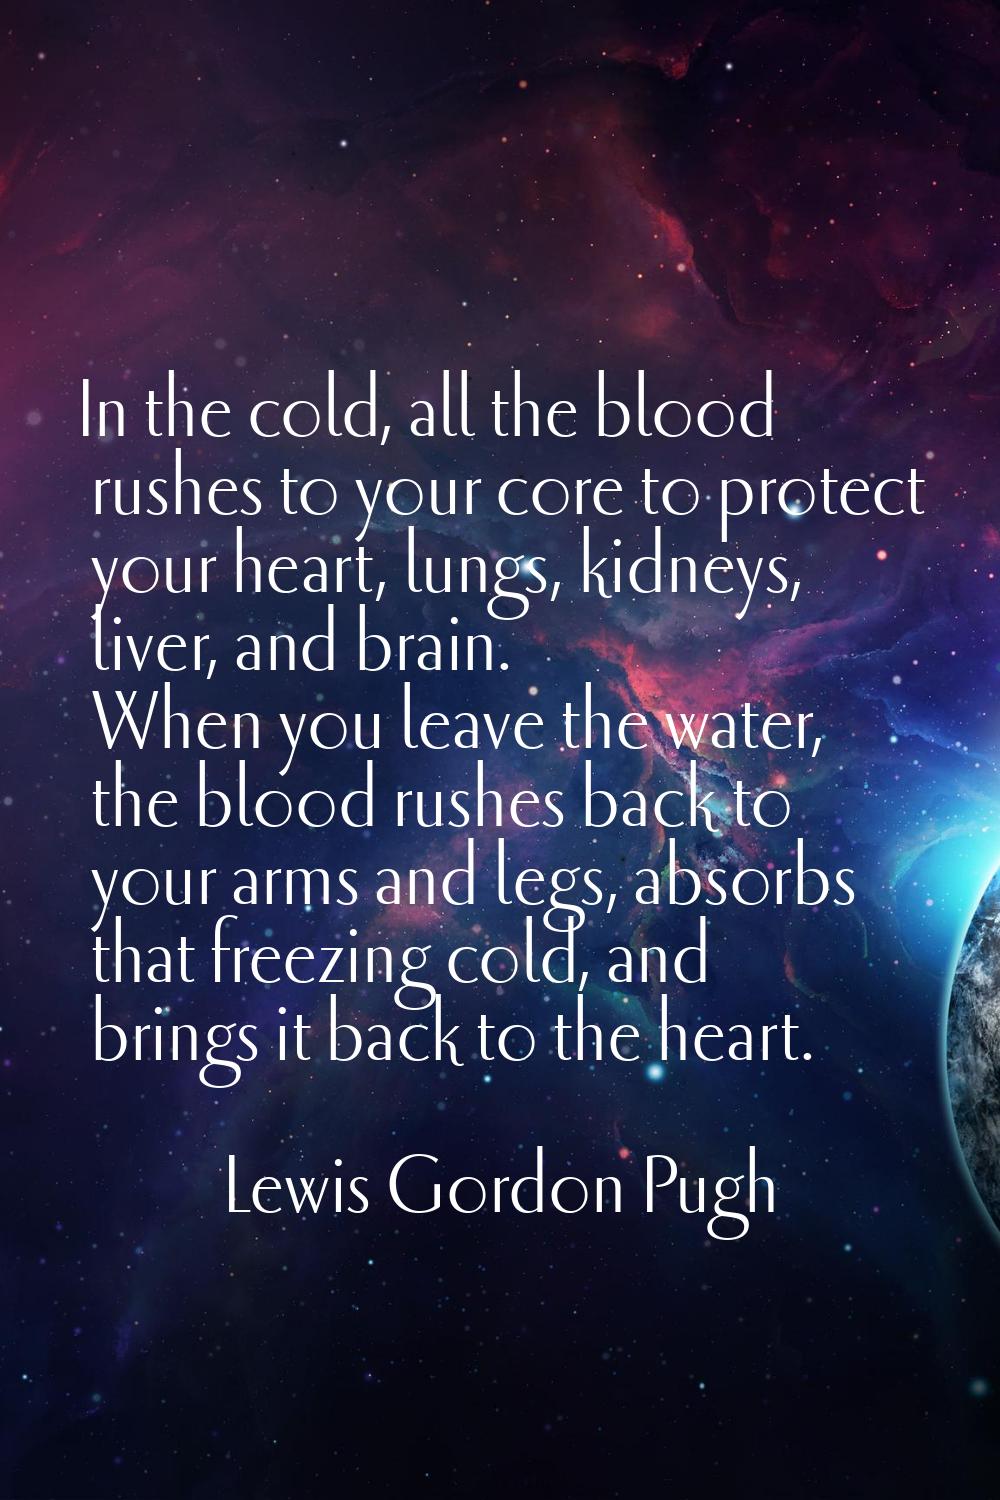 In the cold, all the blood rushes to your core to protect your heart, lungs, kidneys, liver, and br